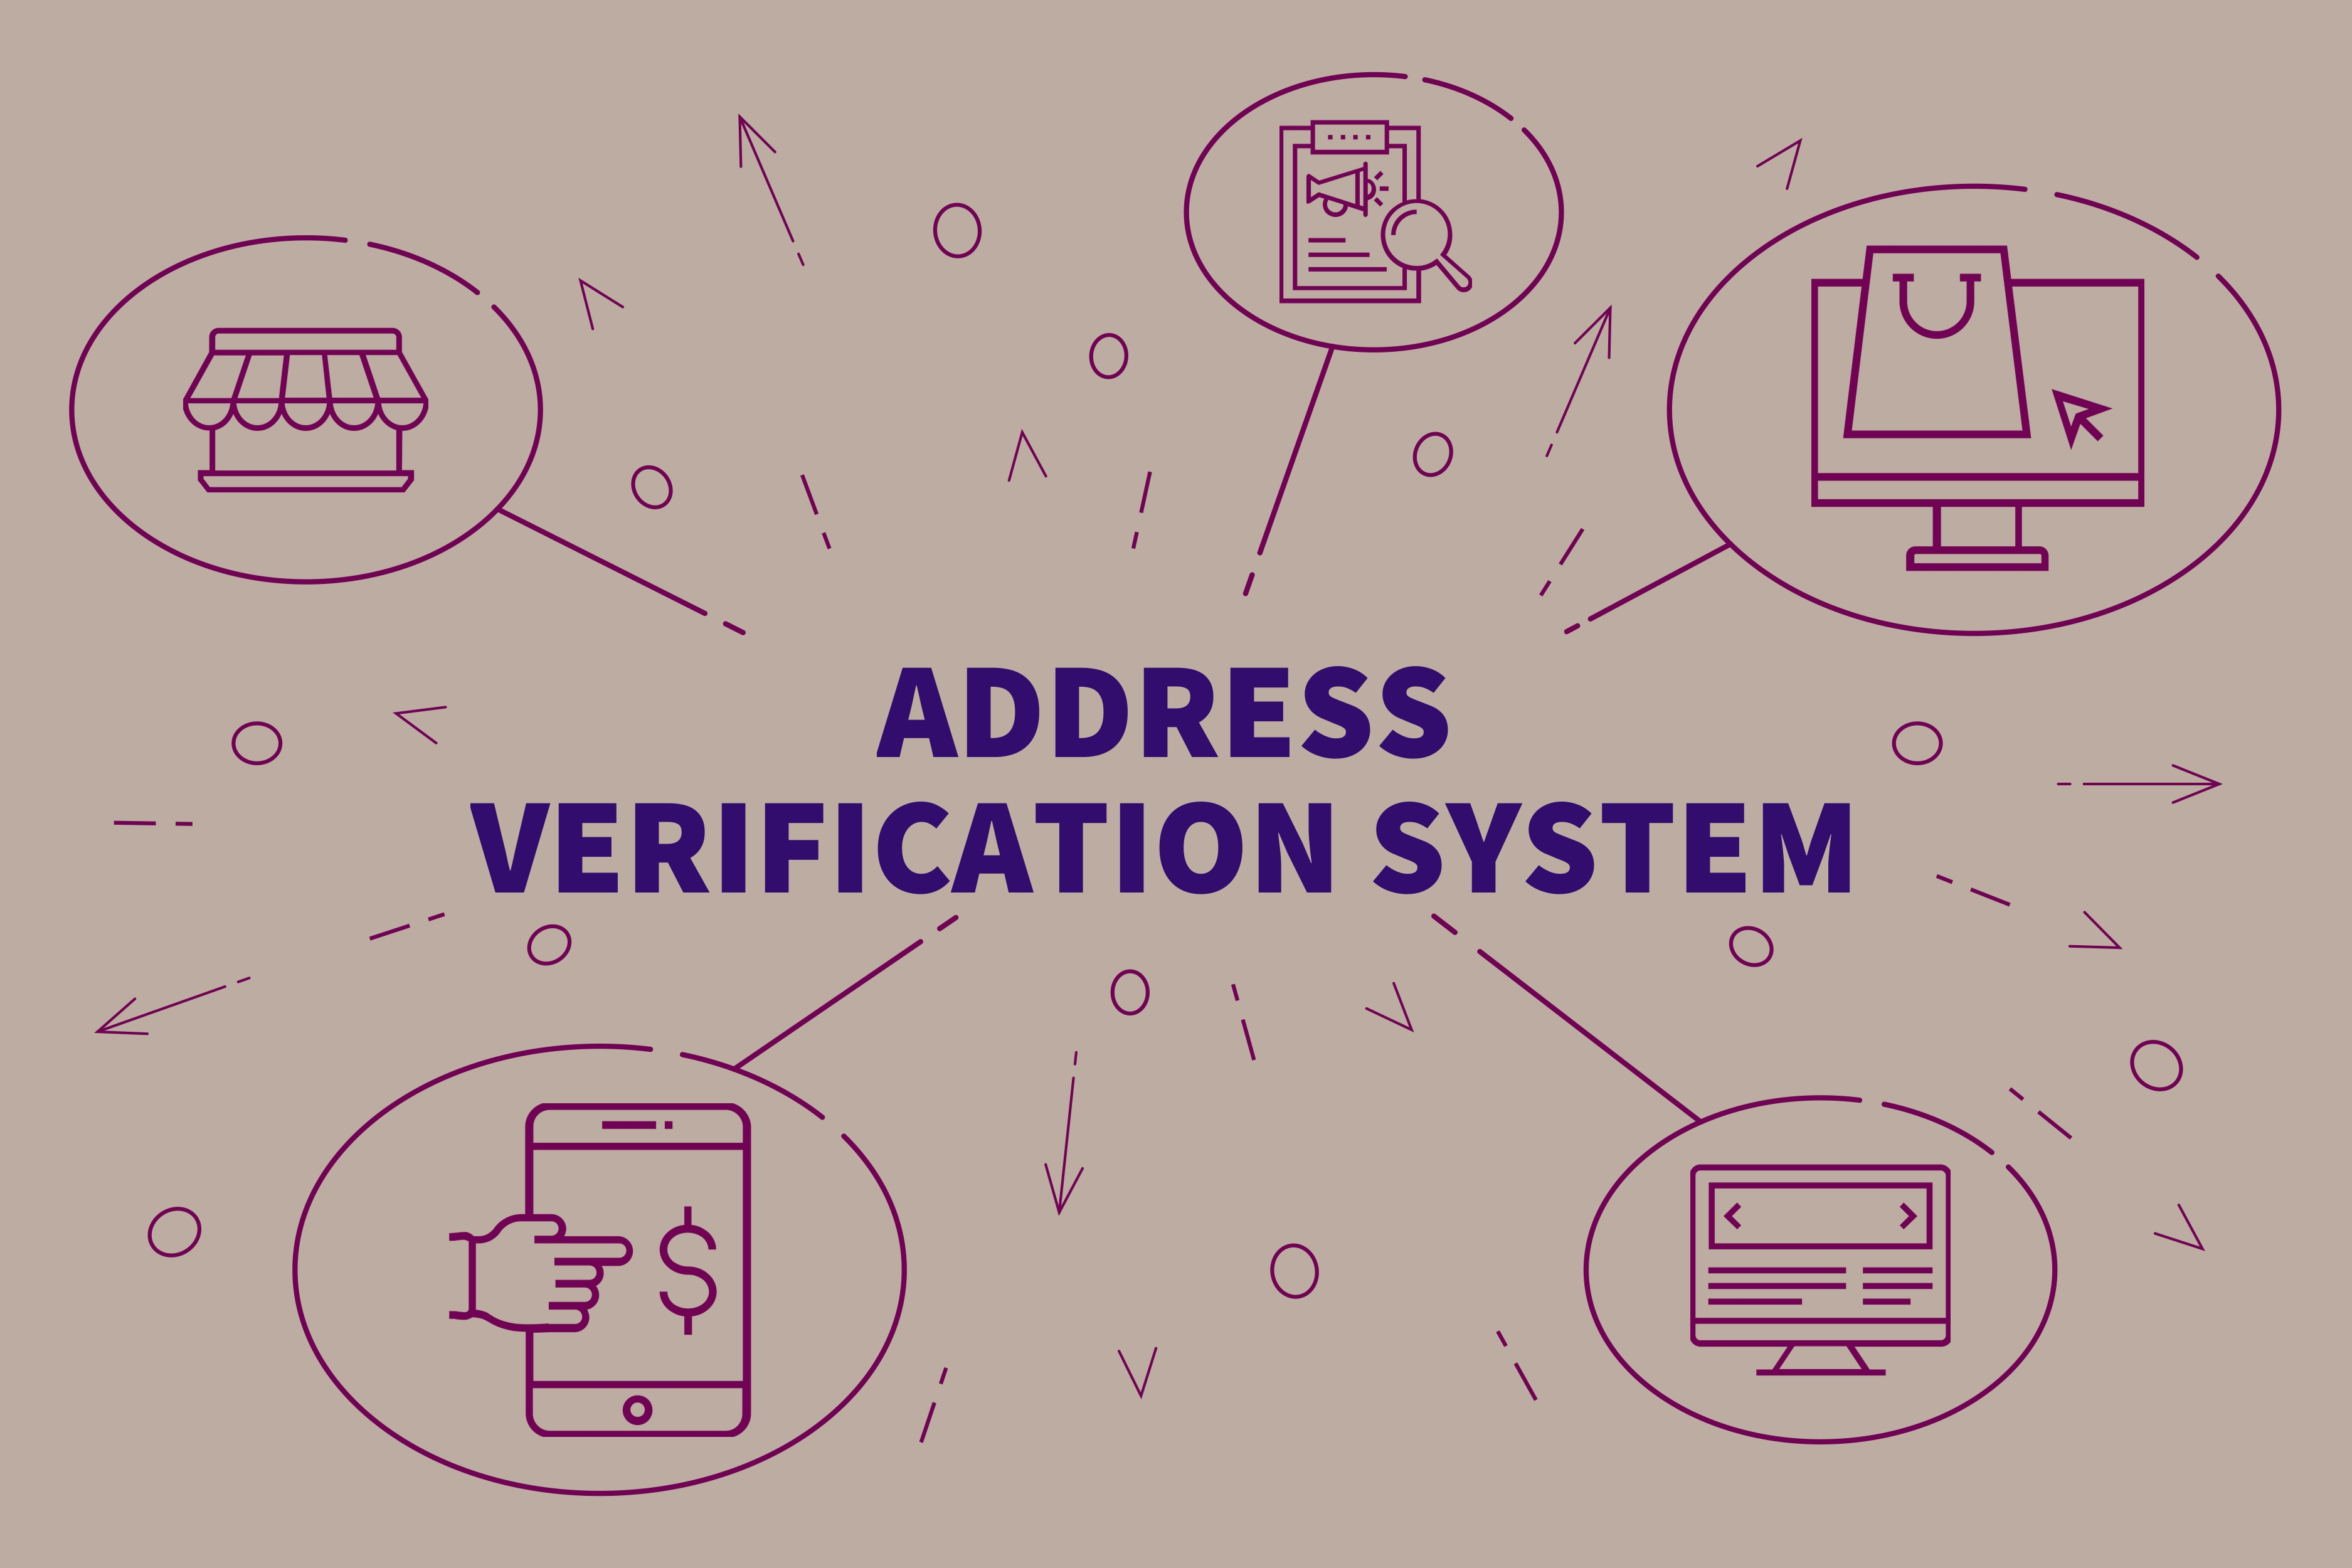 How to use address verification for enhanced due diligence?